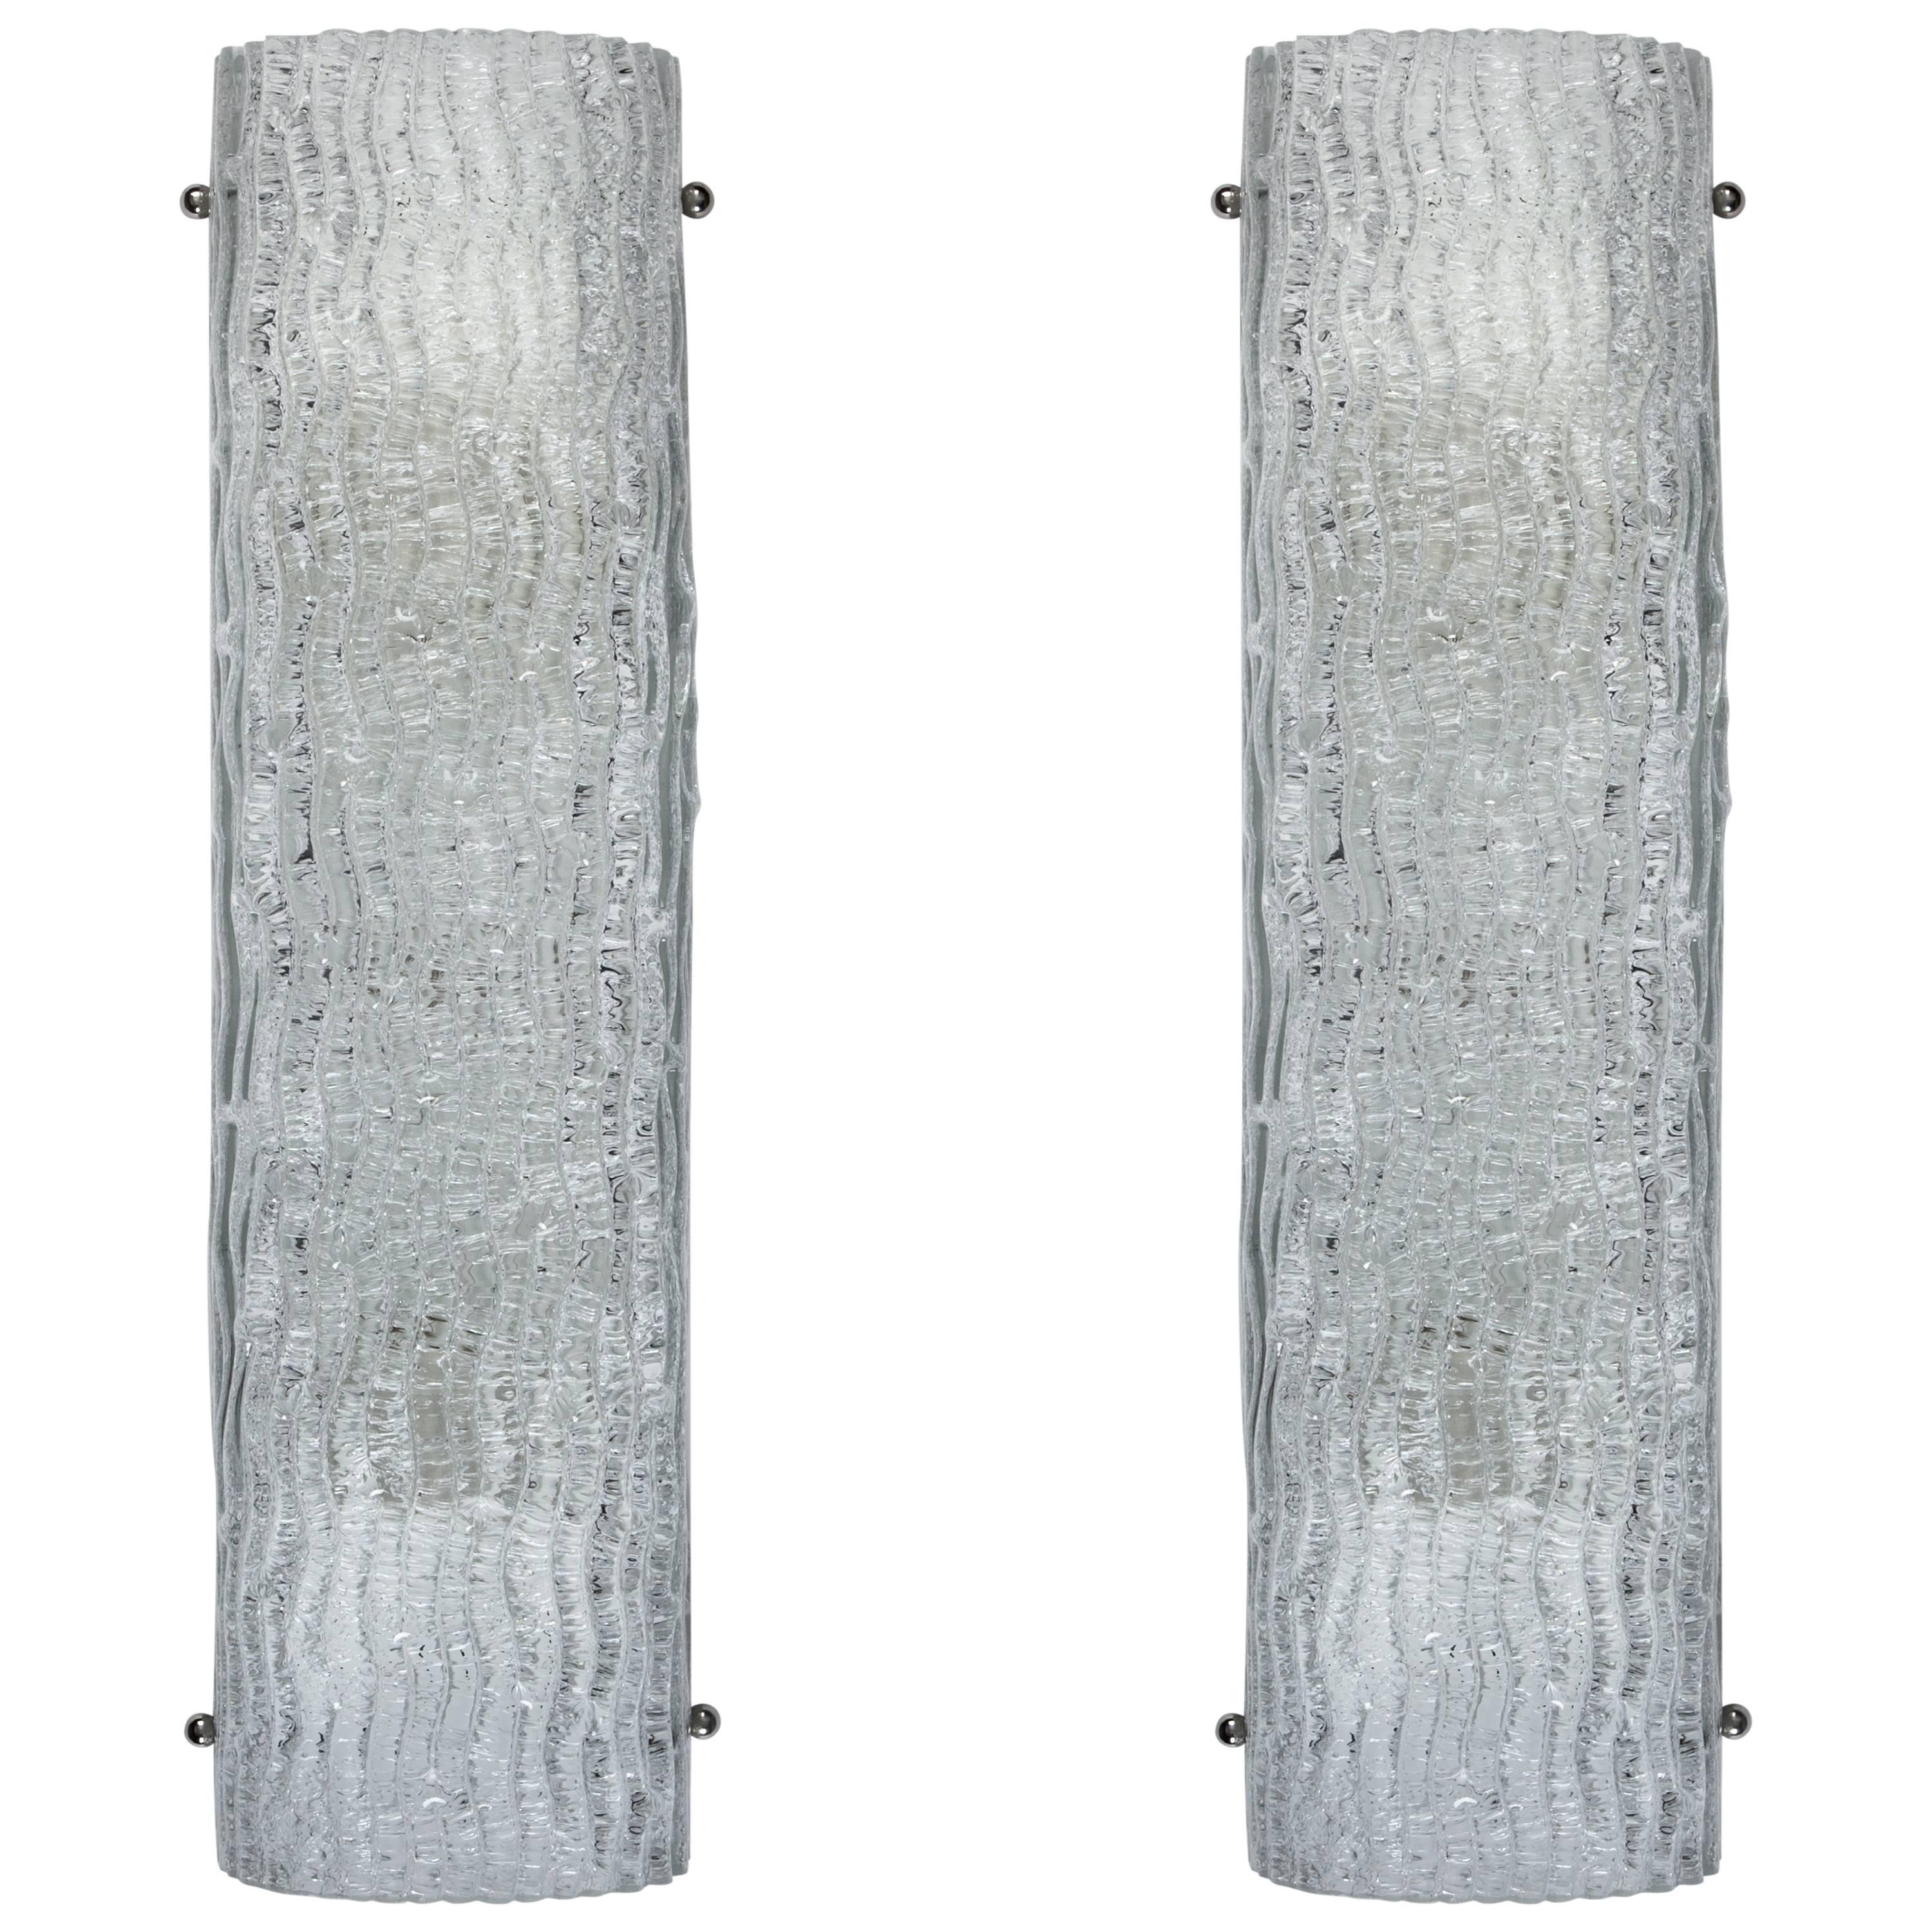 Large Mid-Century Italian Glass Sconces with Textured Wave Pattern Circa 1960s